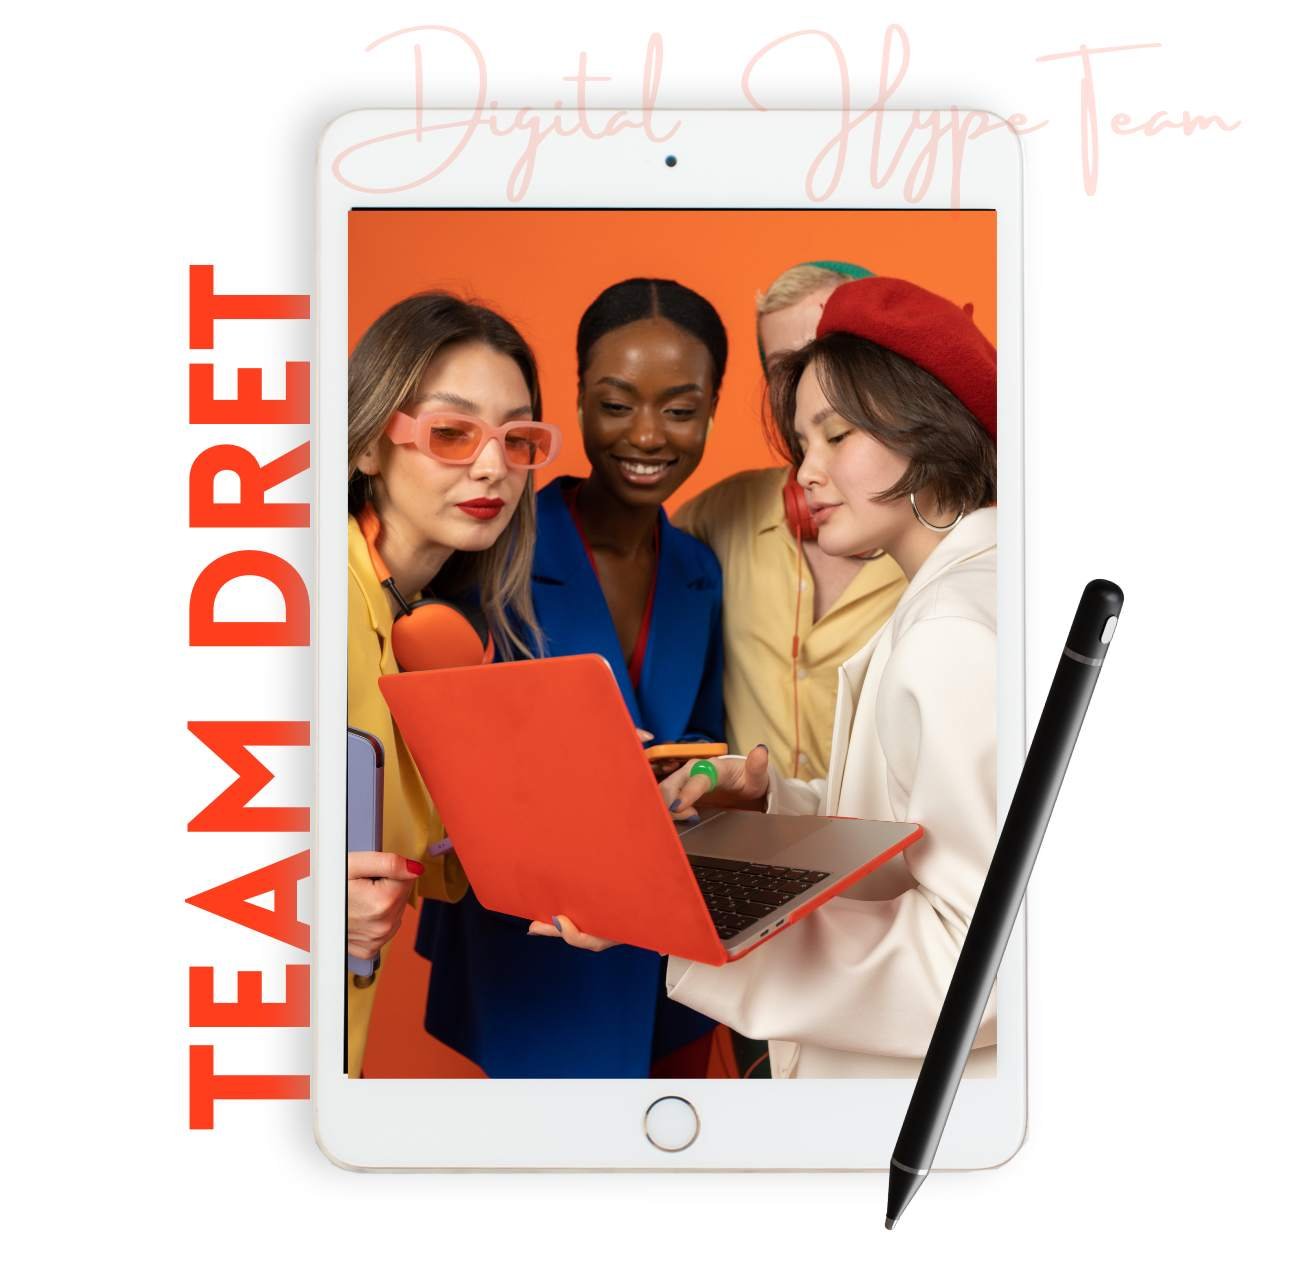 Tablet displaying a diverse team of professionals collaborating with a laptop, with the text "TEAM DRET" and a stylus pen.